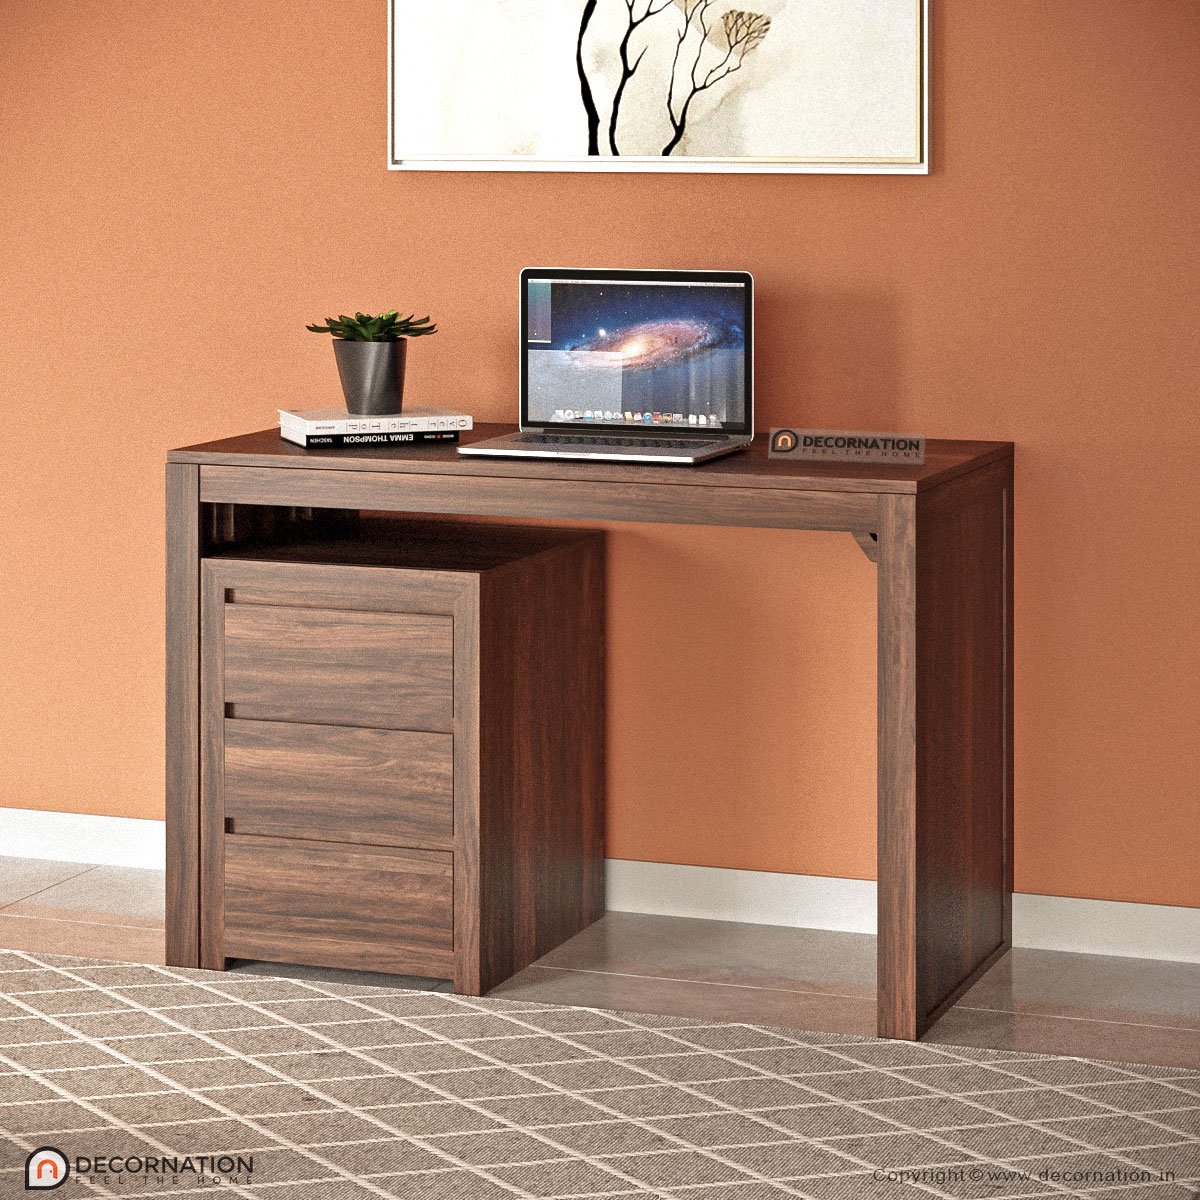 Christopher 3 Drawer Storage Computer Table